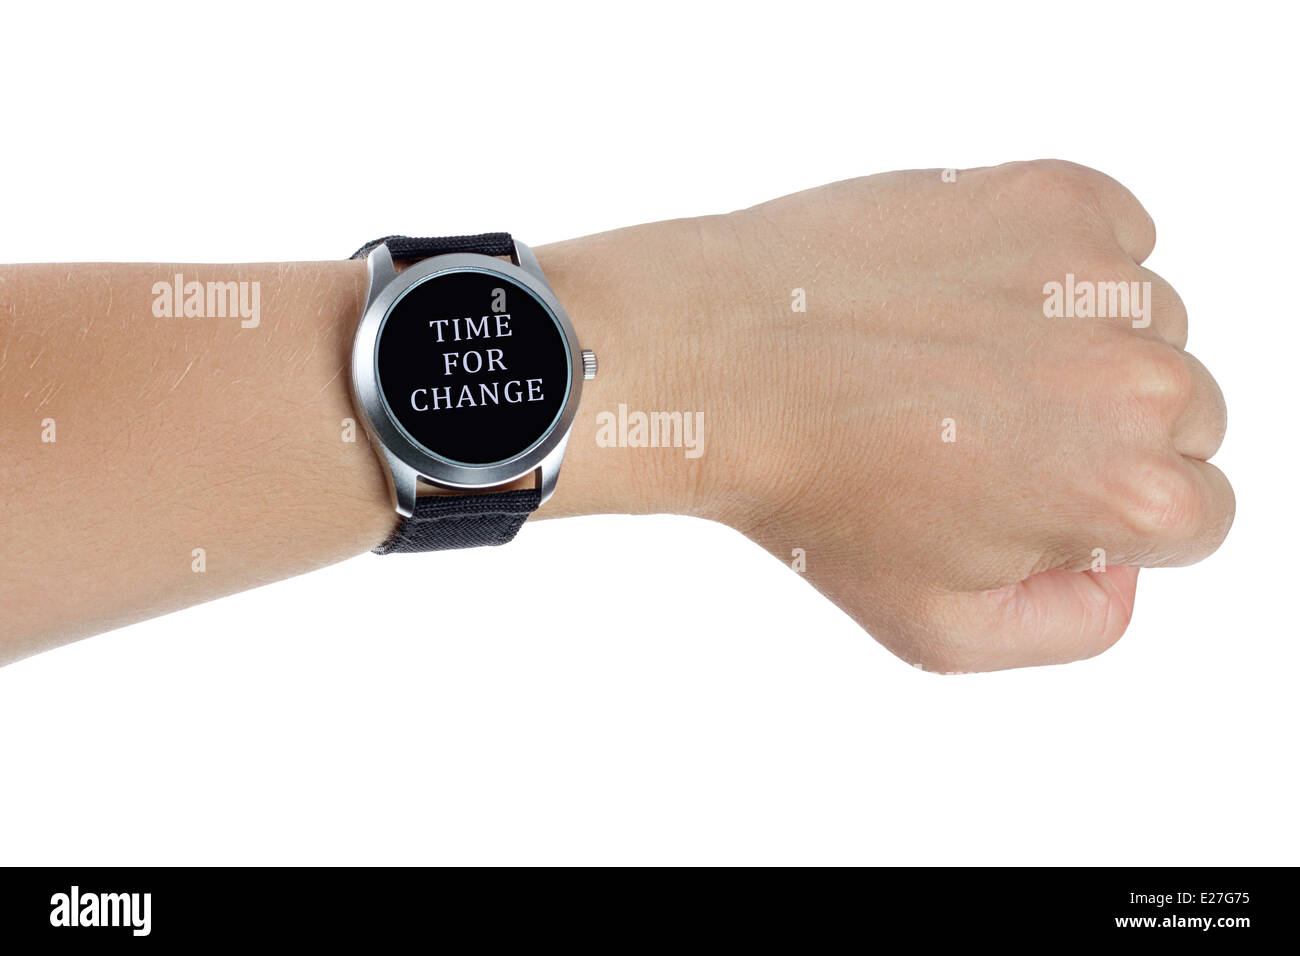 A hand wearing a black wrist watch. Time for change concept Stock Photo